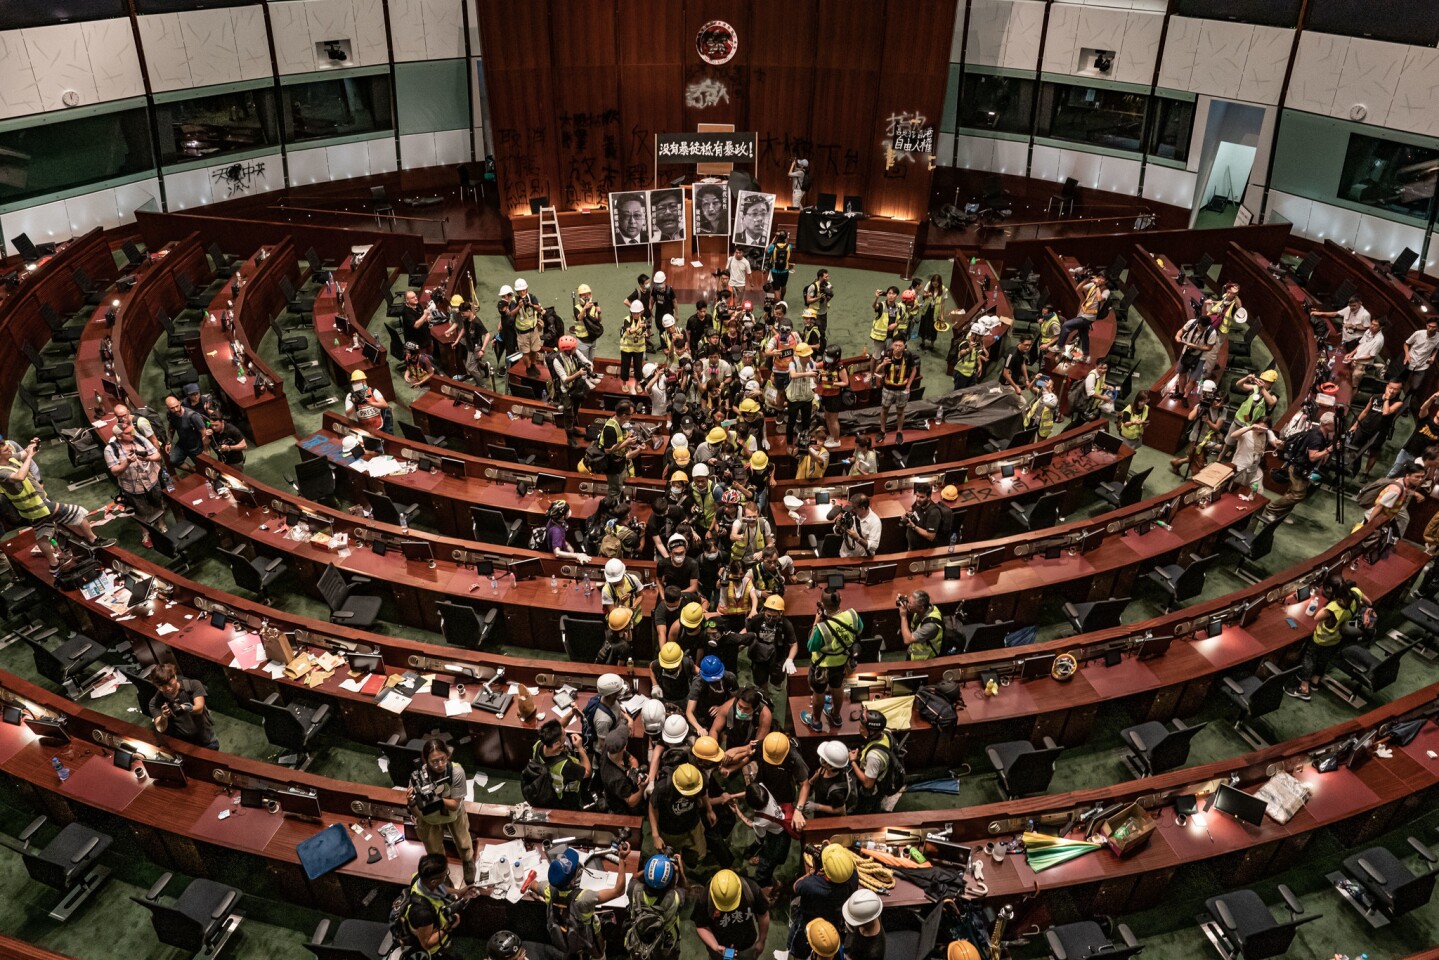 Protesters leave the parliament chamber of the government headquarters on July 1, 2019, in Hong Kong. Thousands of pro-democracy protesters faced off with riot police on July 1, during the 22nd anniversary of Hong Kong's return to Chinese rule.